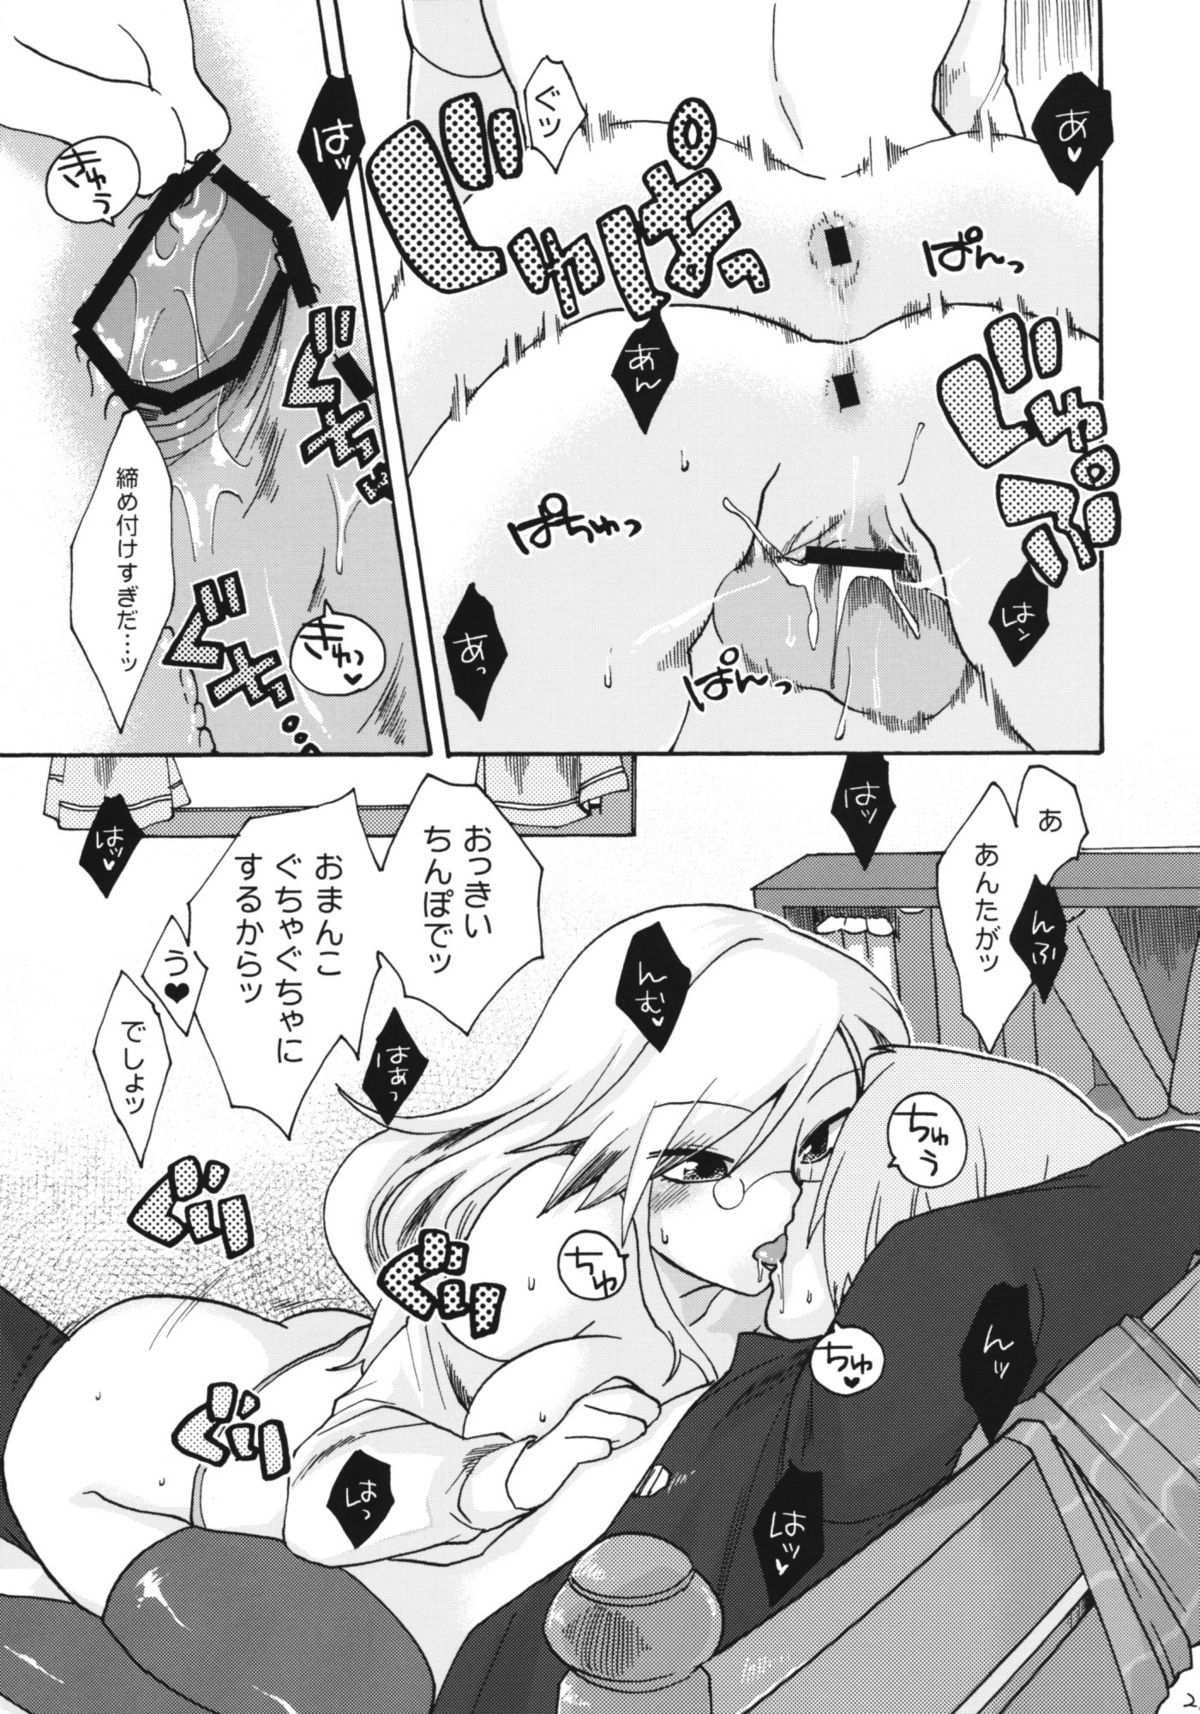 (ComiComi13) [Trip Spider (niwacho)] In You And Me (7th DRAGON) page 20 full